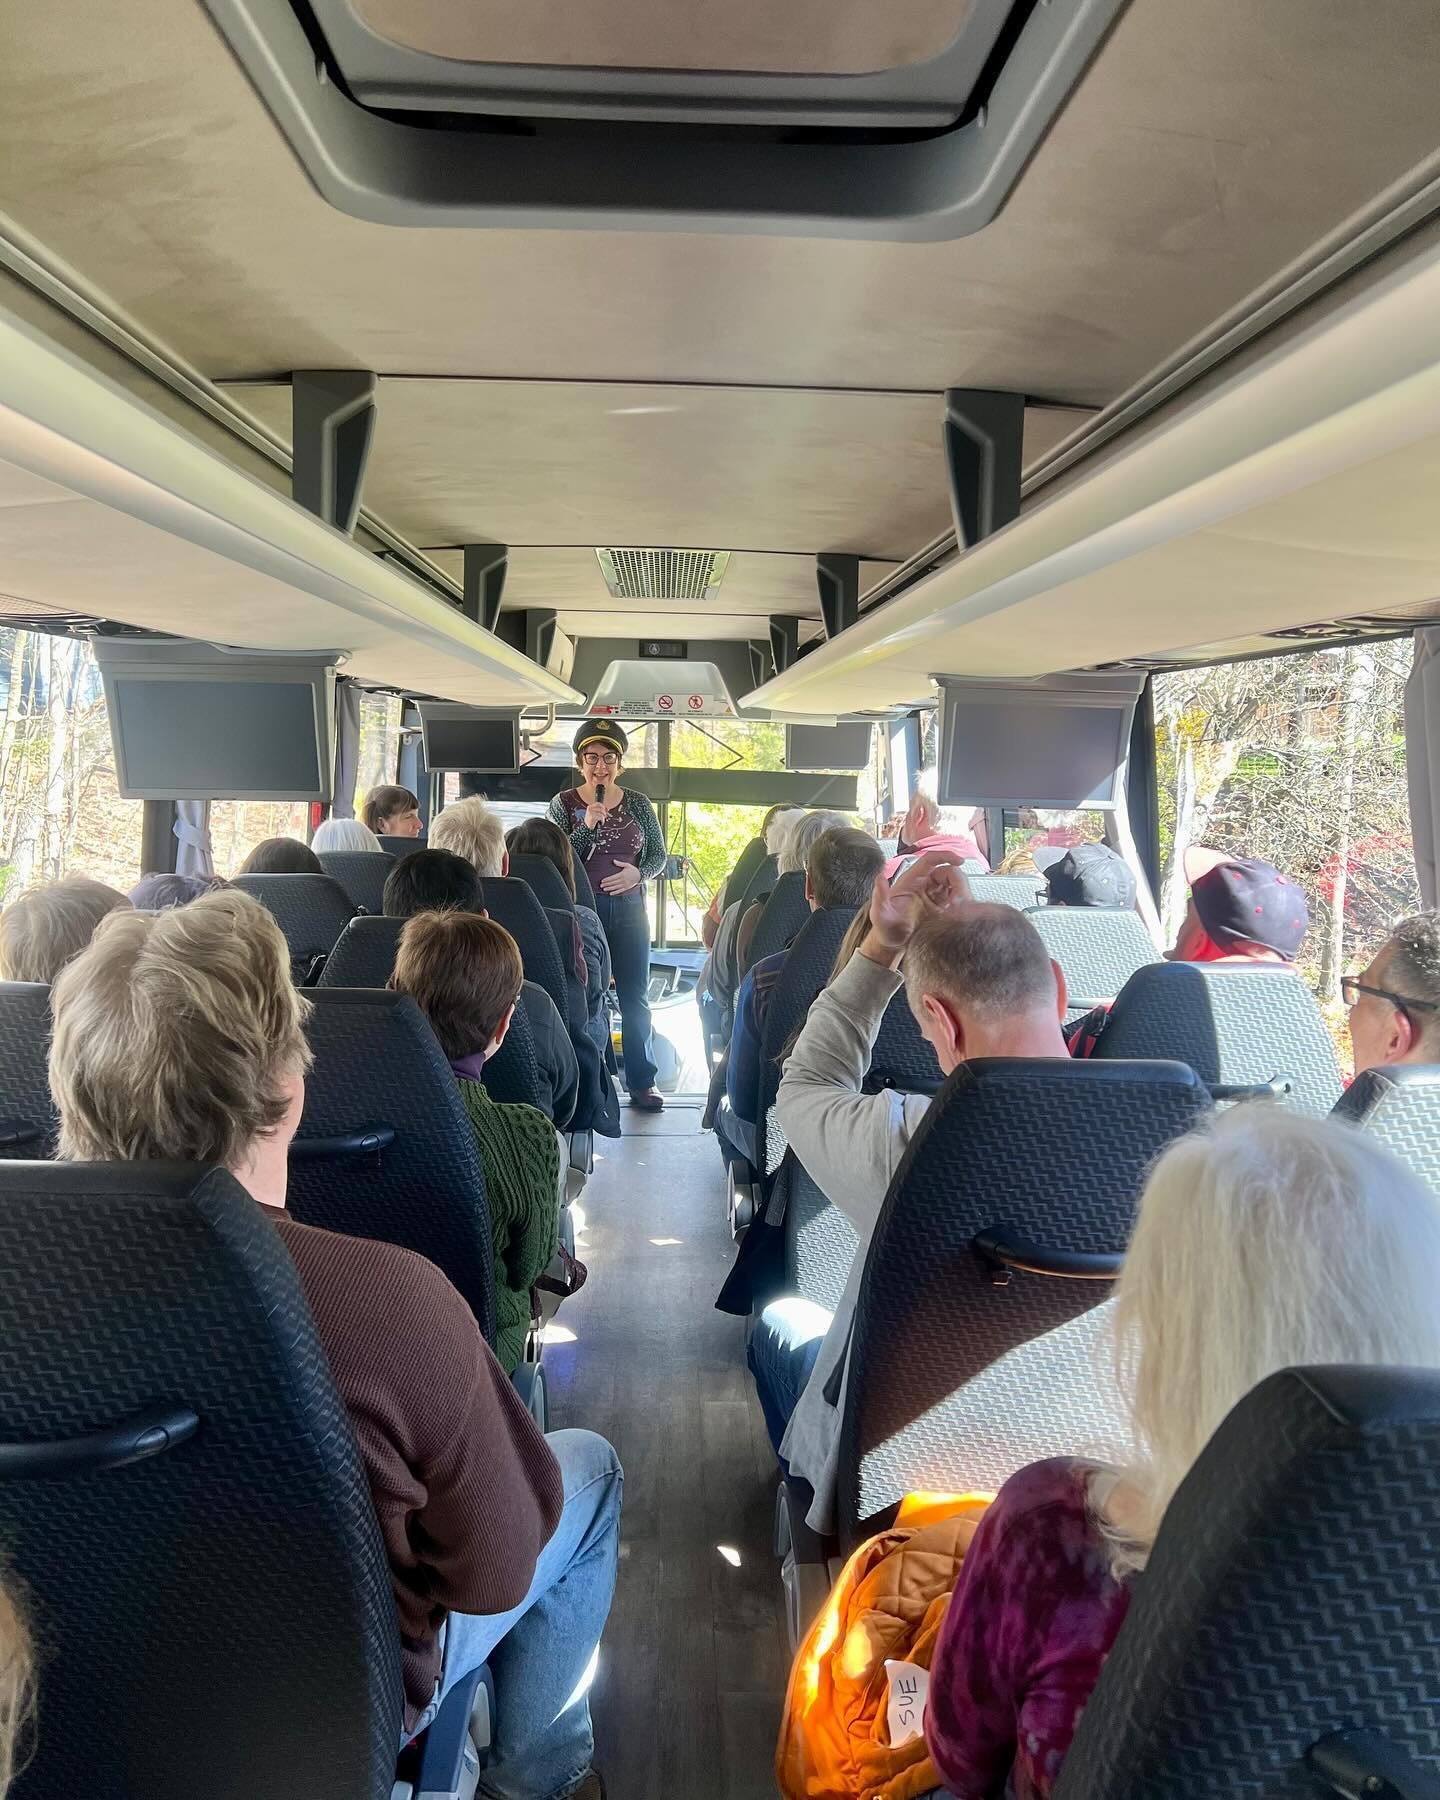 The @asparagusvalleypotterytrail potters and their guest potters rented a bus today and went on our own tour of all of the studios to celebrate our 20th annual pottery trail!!!
What a great day we had! Here is a little glimpse of what you might see a